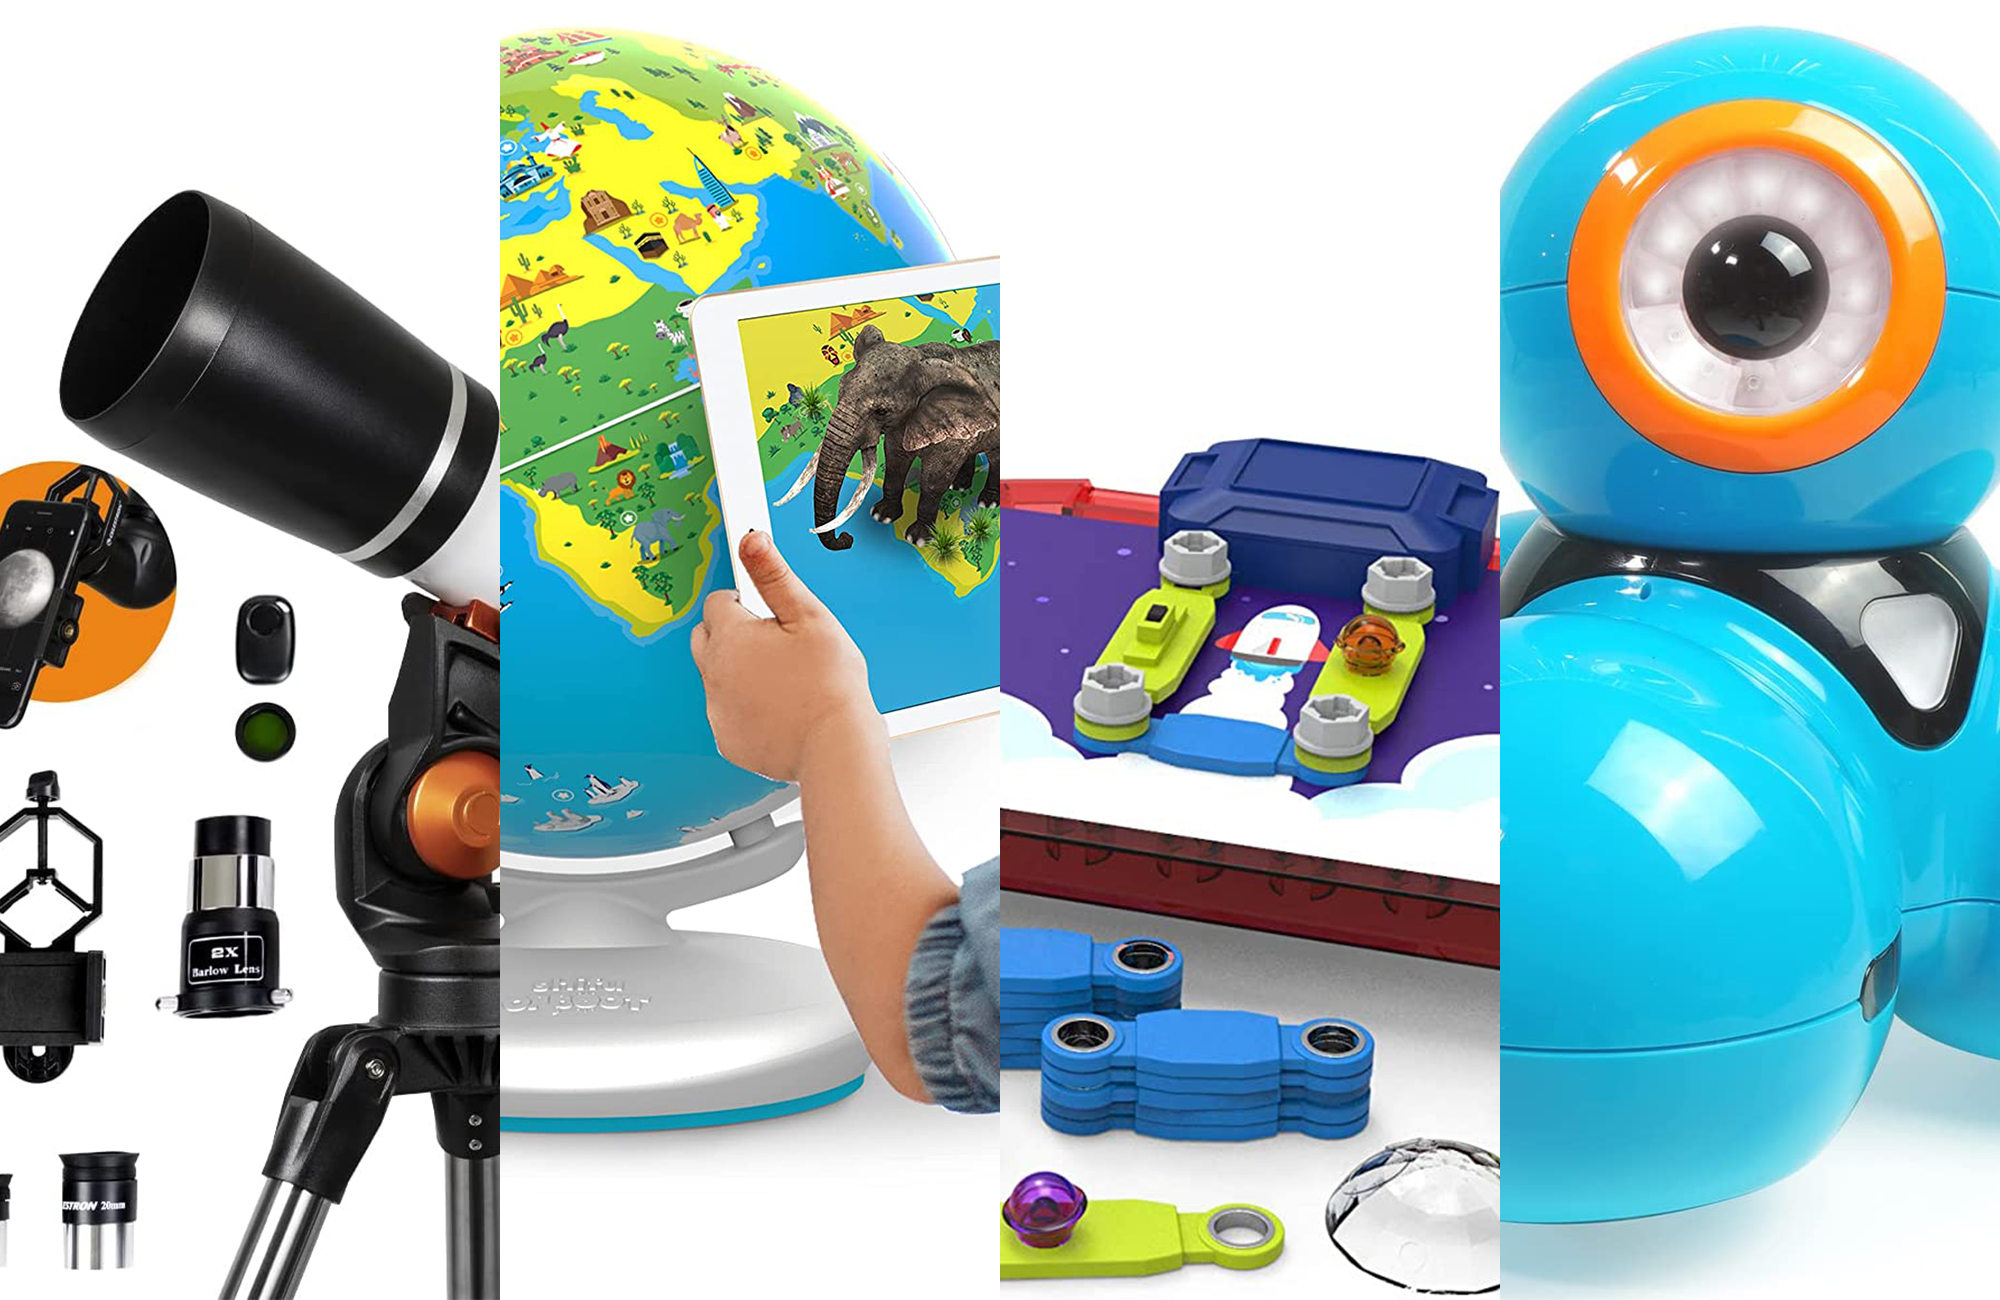 Toys As Tools Educational Toy Reviews: Review + Giveaway: Pre